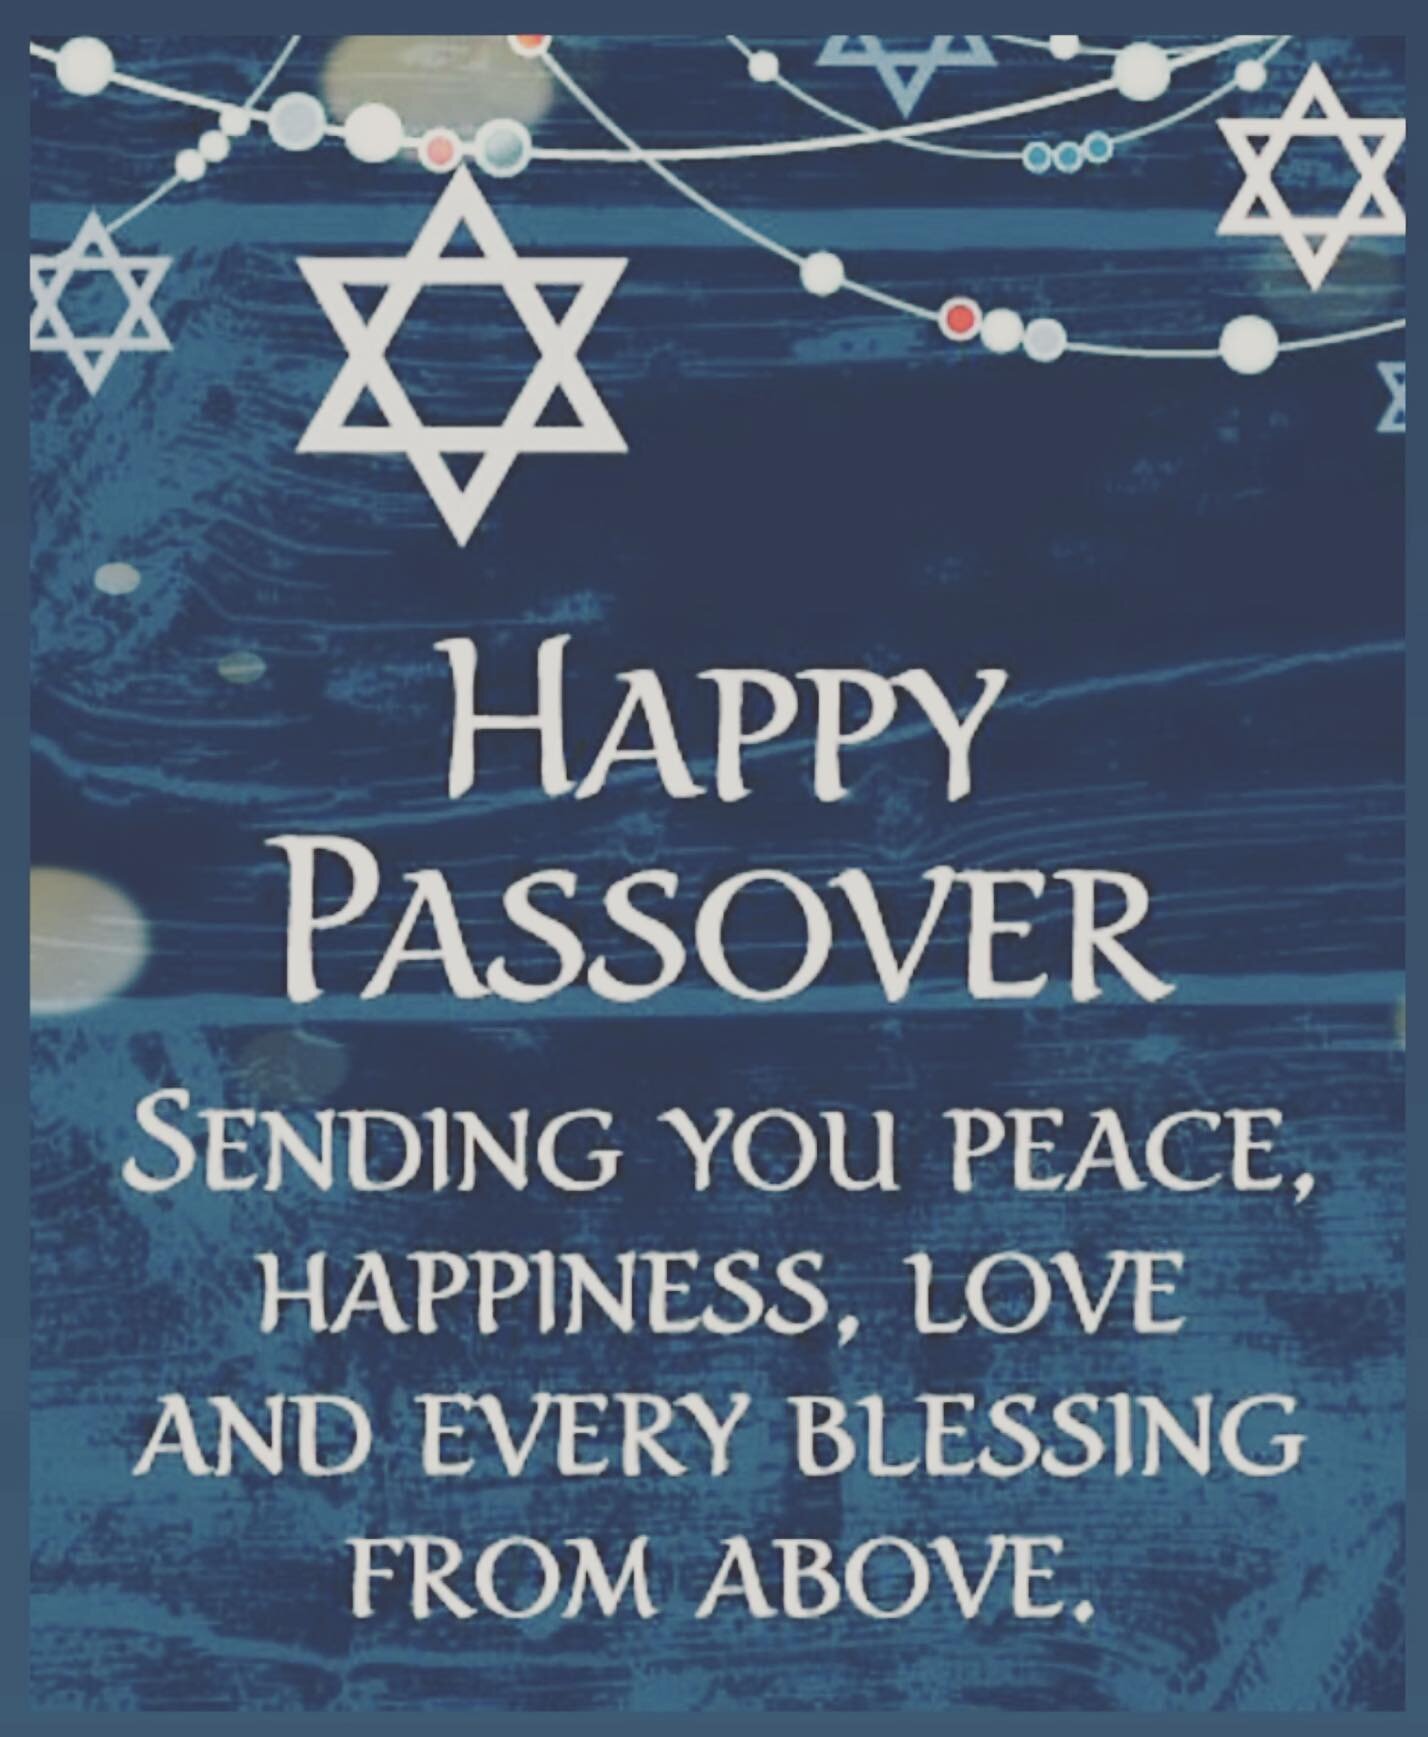 To all our LL friends and families who celebrate, may you always be surrounded by people who make your heart whole.

Happy Passover!

#passover2023 #passoverseder #passover #love #light #prosperity